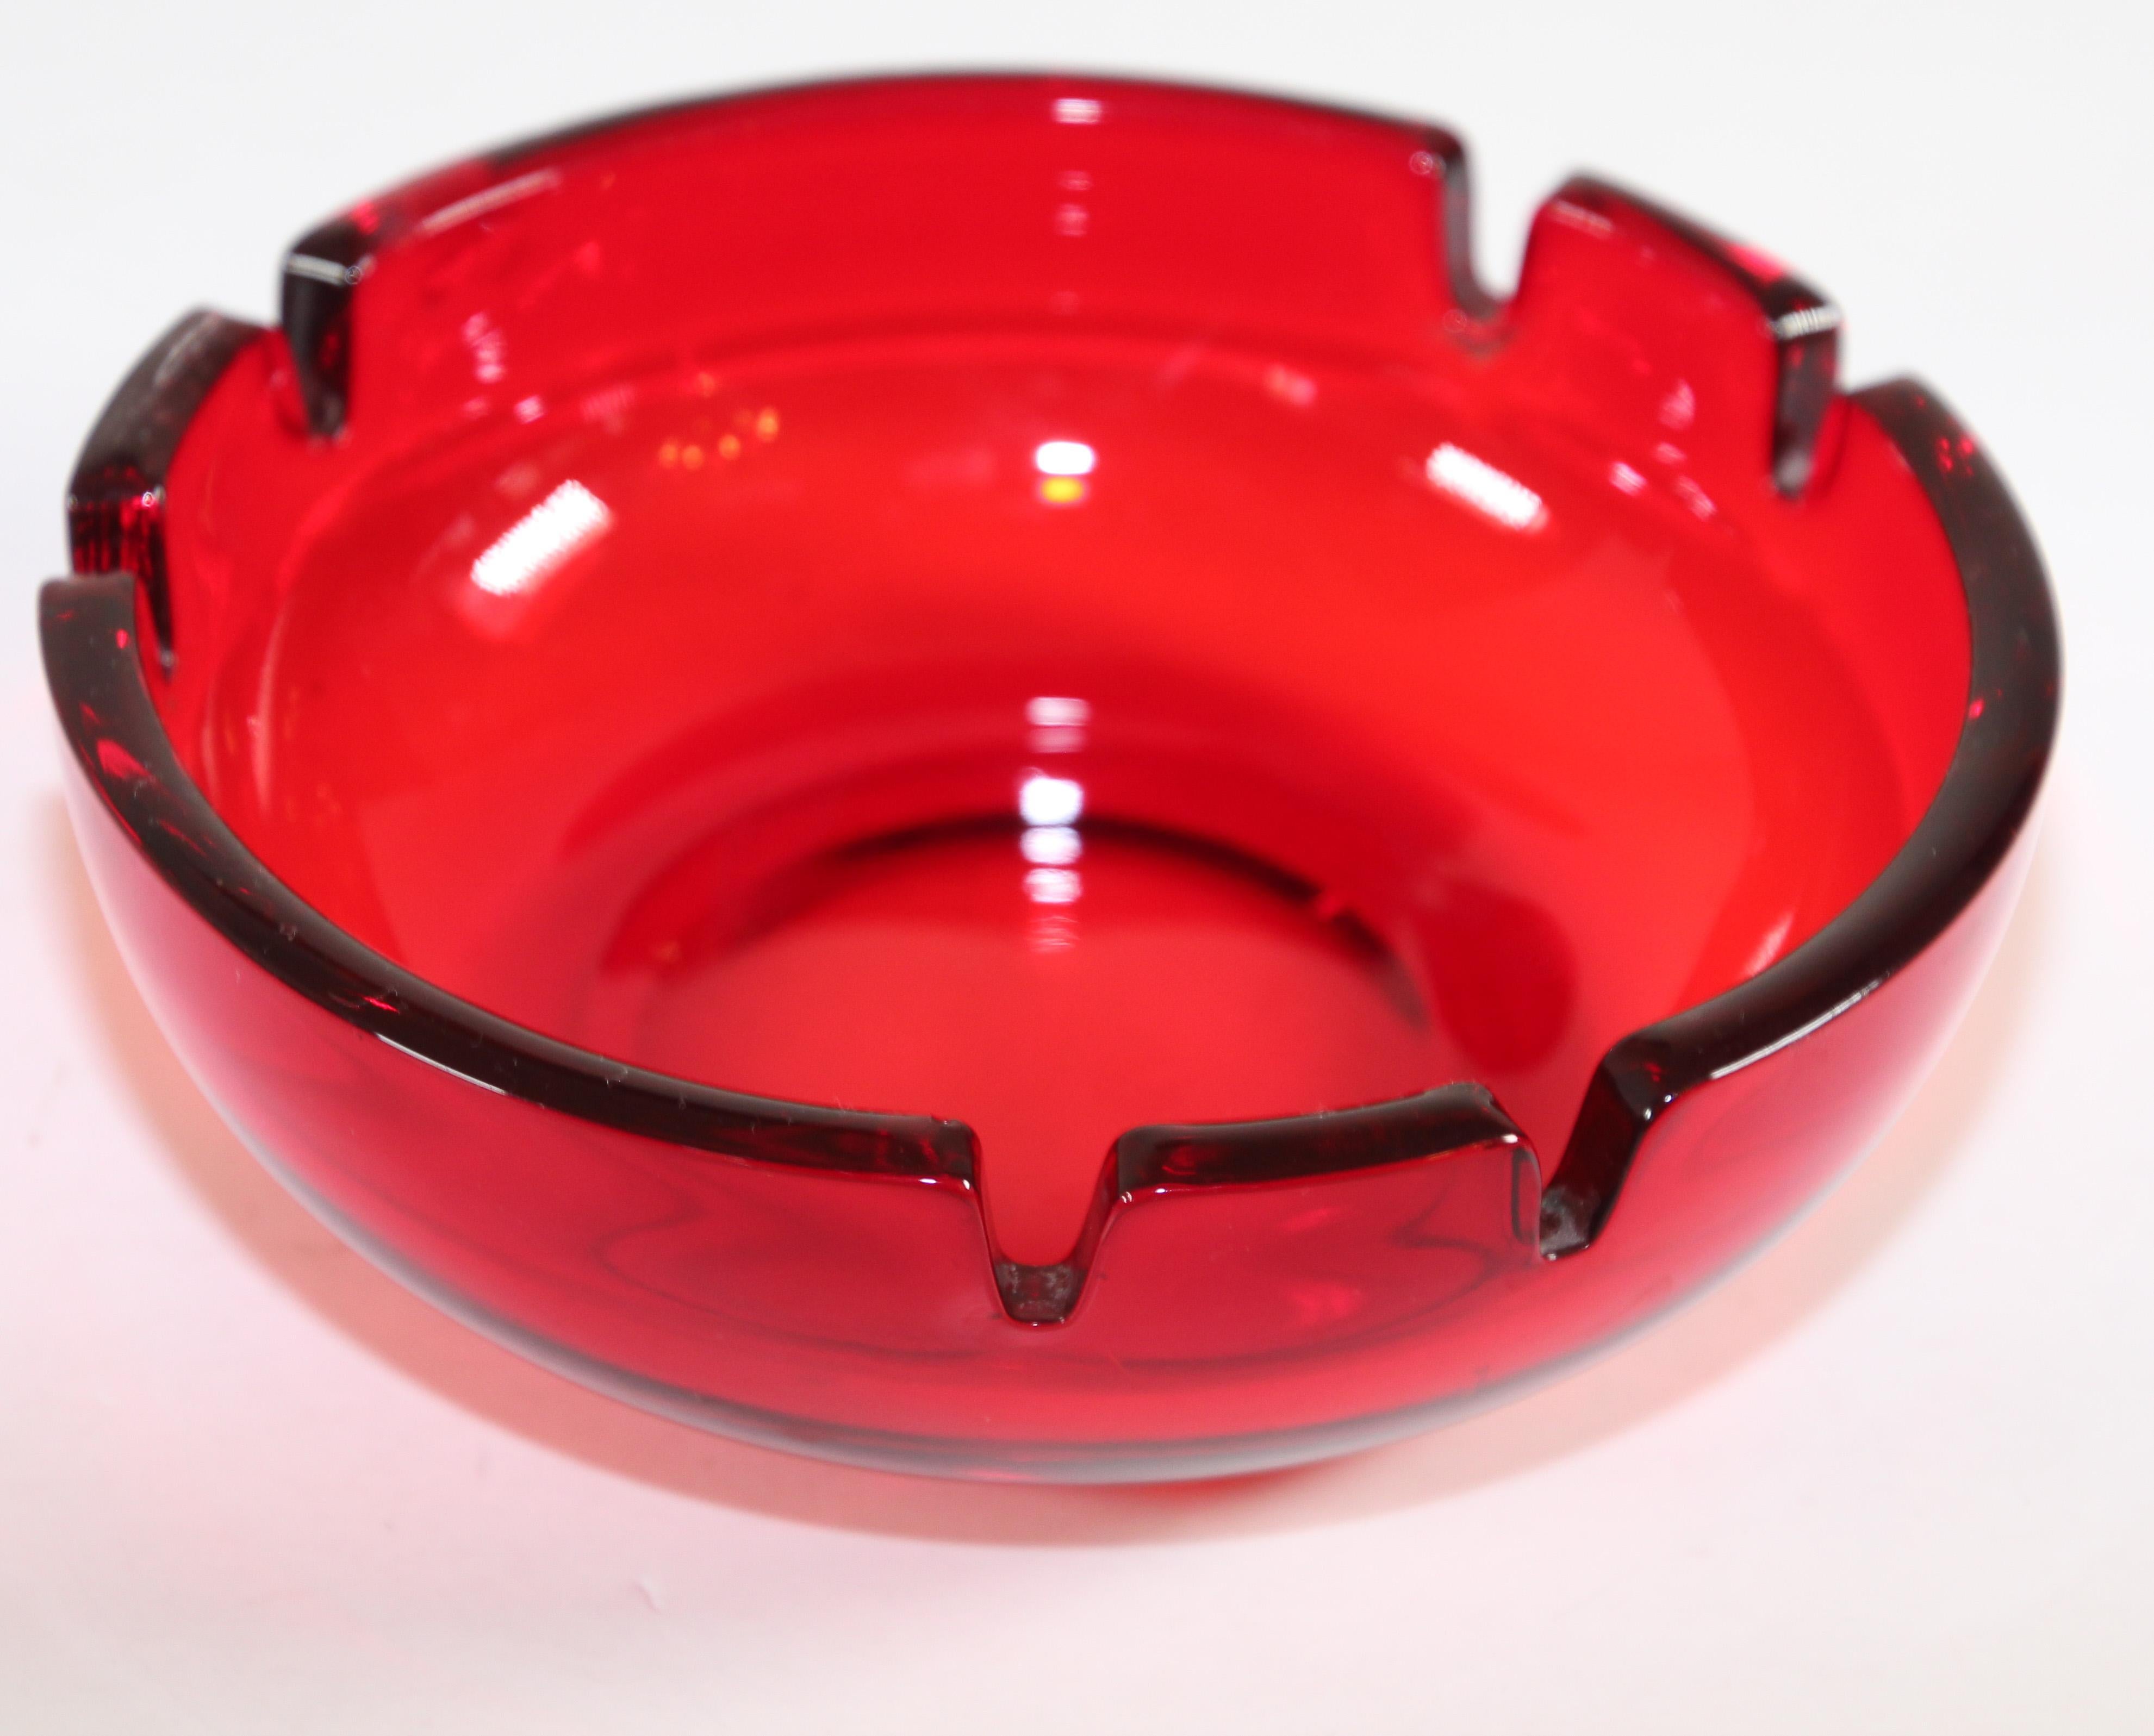 Vintage mid-century large round glass ruby red cigar ashtray
Mid-Century Modern glass ashtray circa 1960's – 1970's USA. 
Hand-made by Viking Art Glass in their beautiful ruby red color.
Large, heavy and stunningly beautiful. 
The vintage ruby